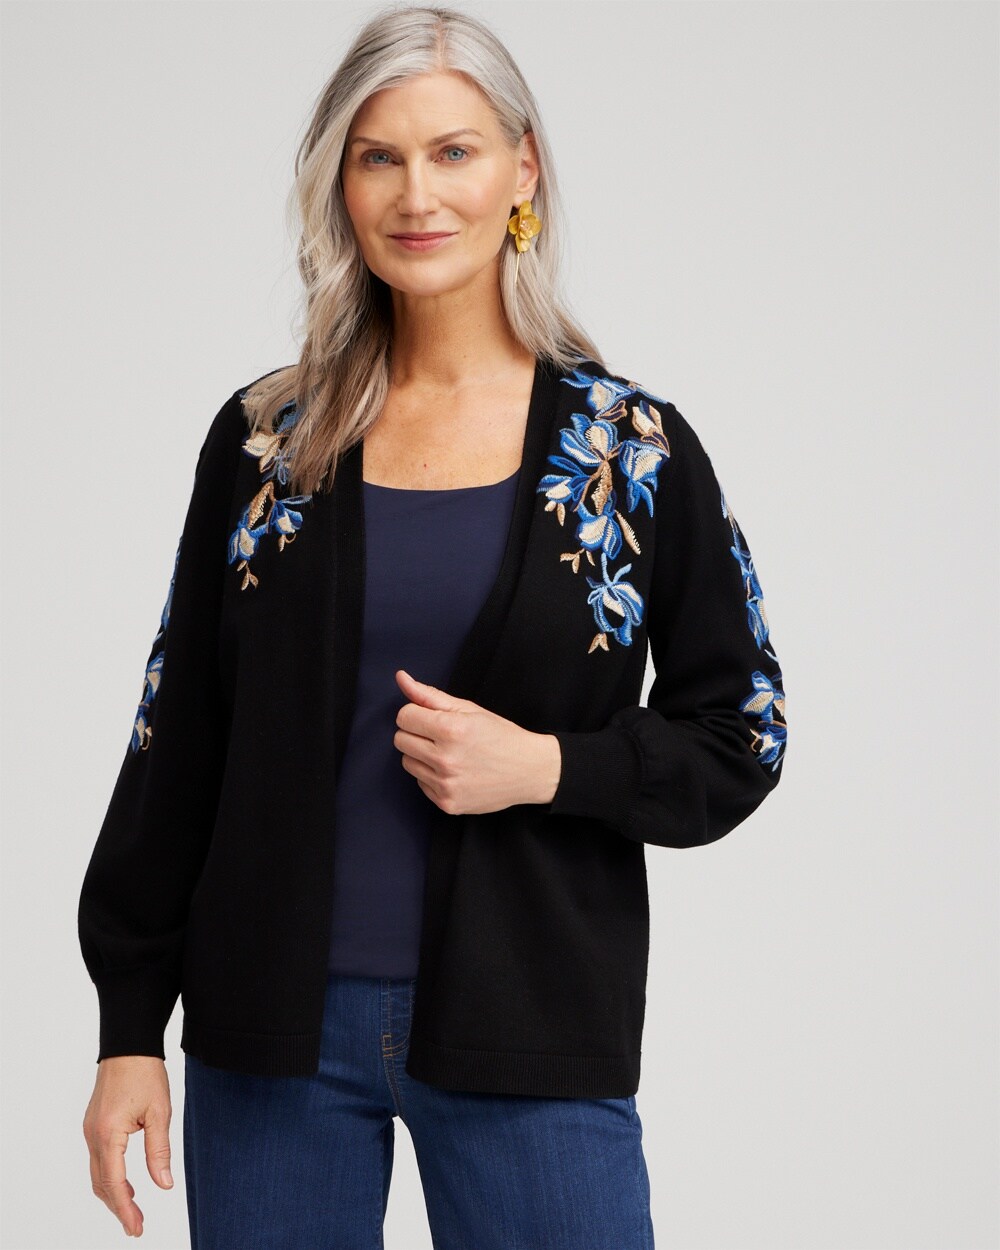 Floral Embroidered Cardigan - Chico's